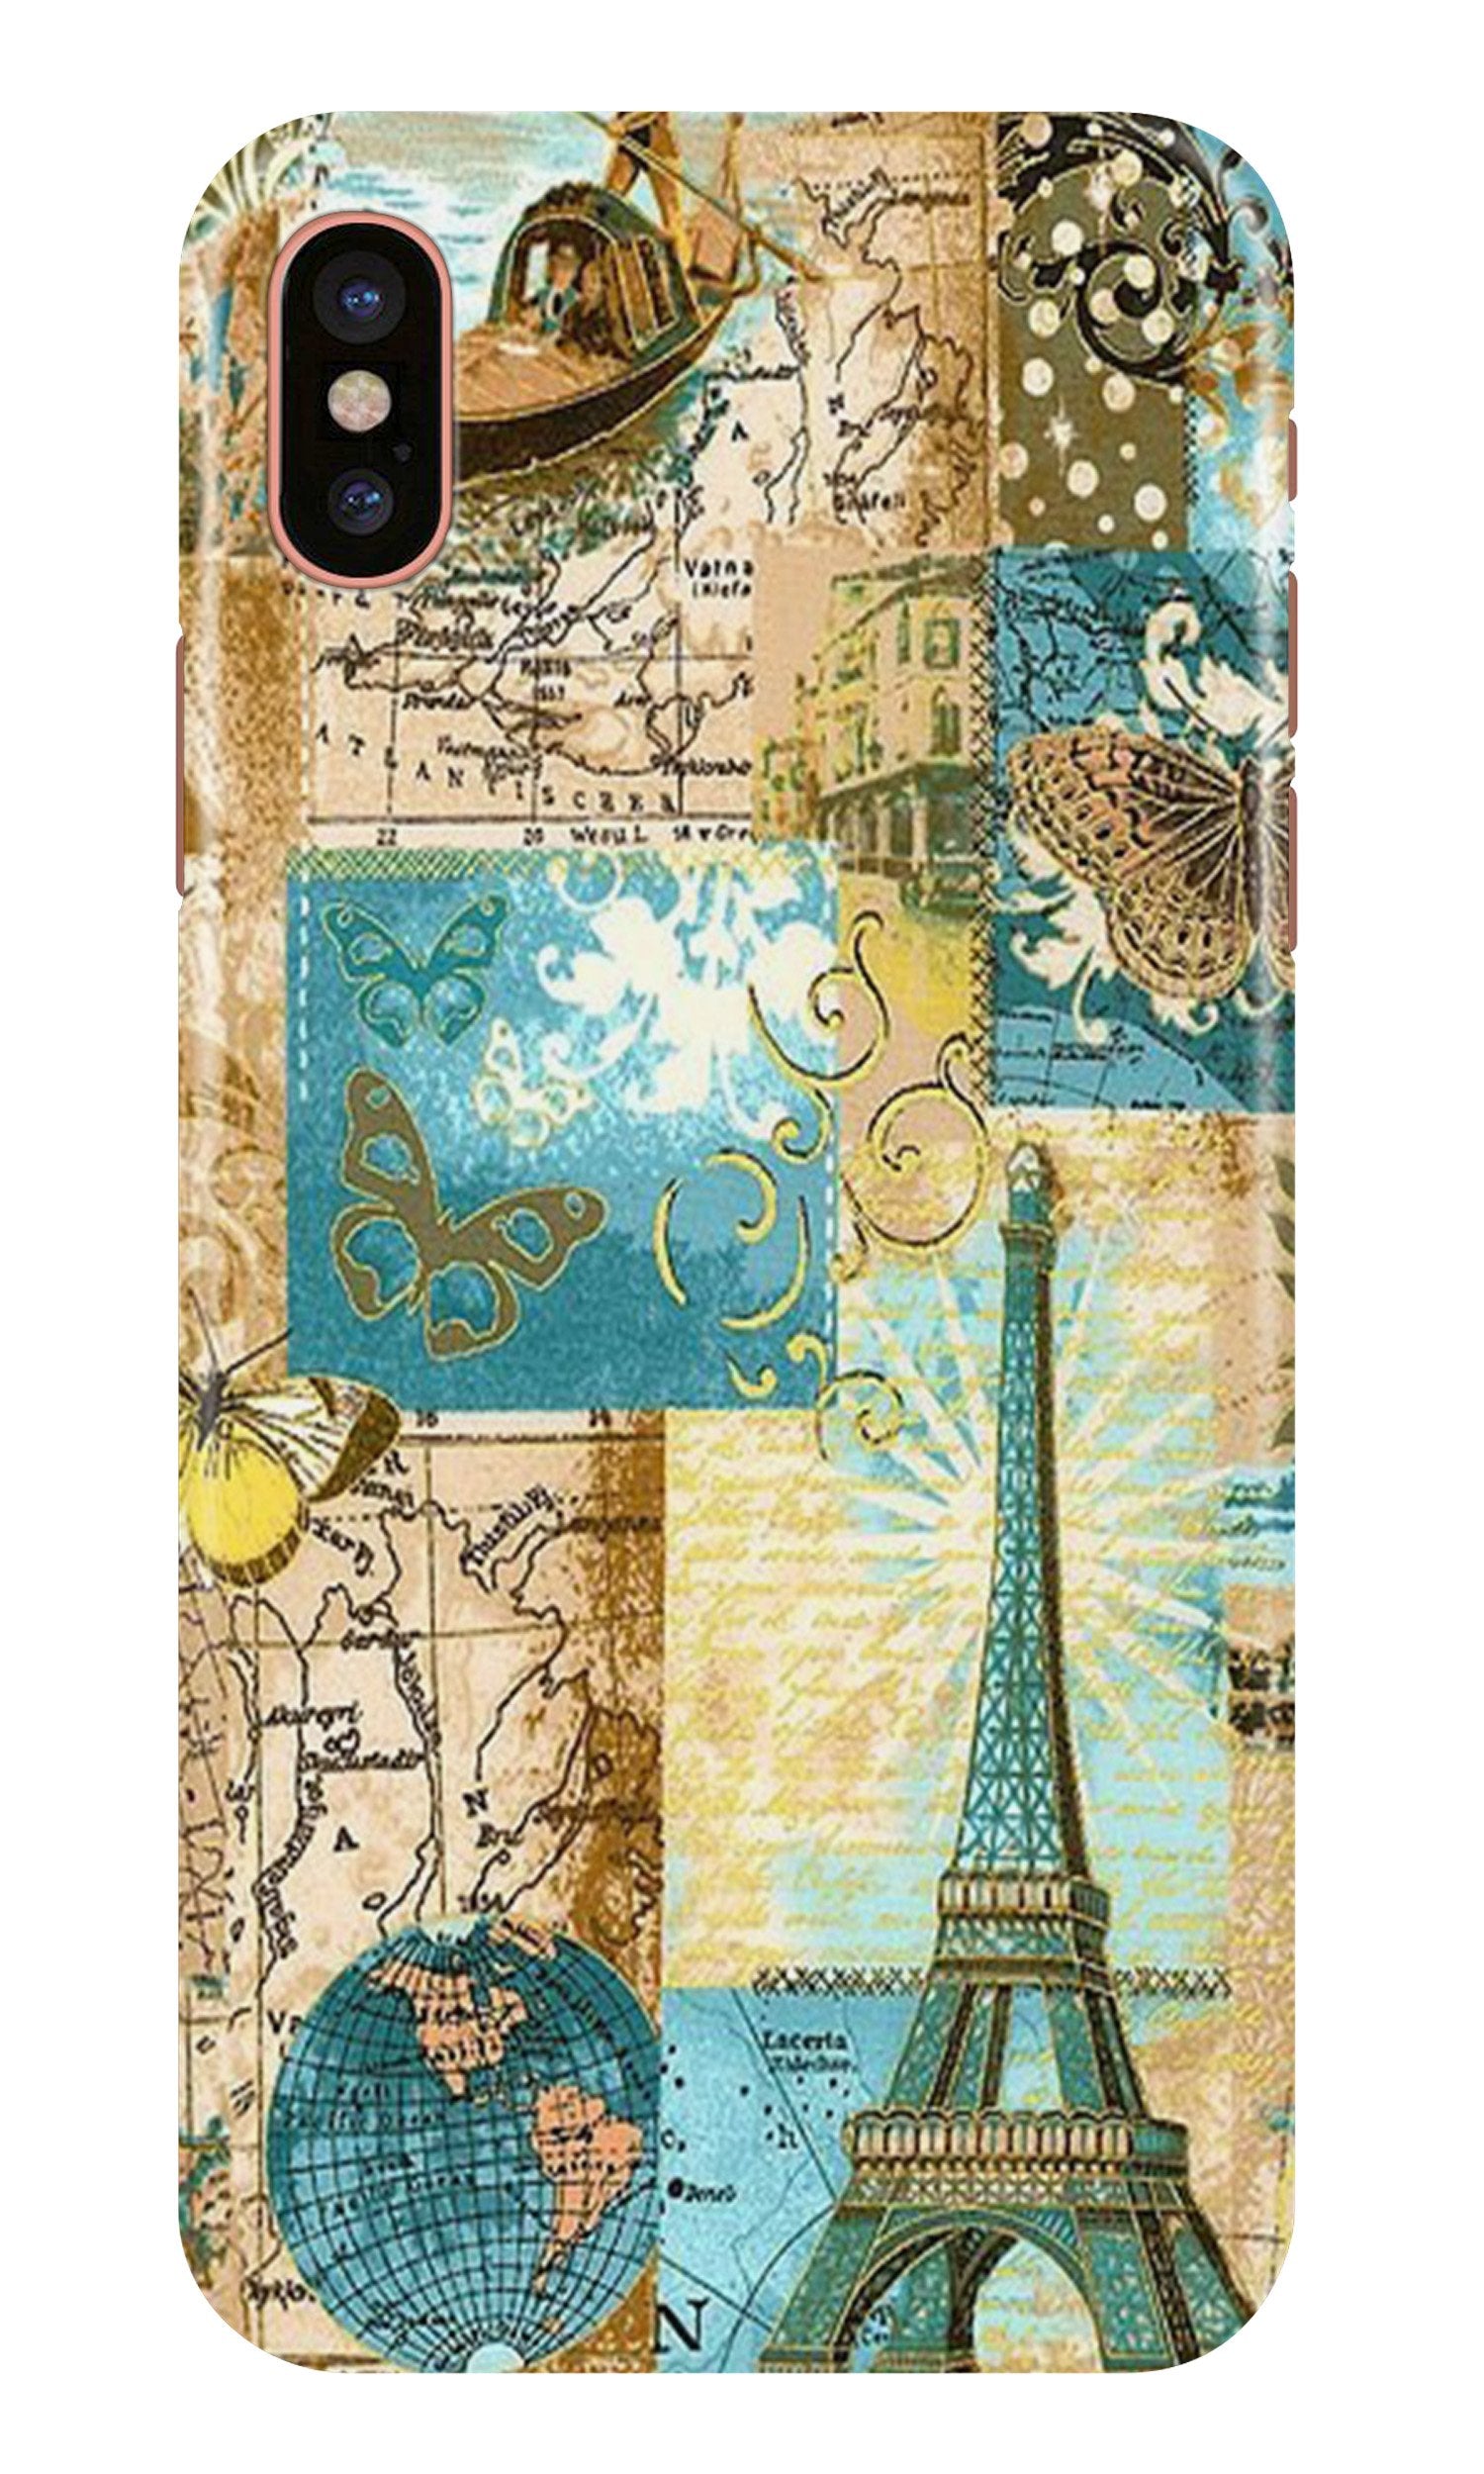 Travel Eiffel Tower Case for iPhone X (Design No. 206)